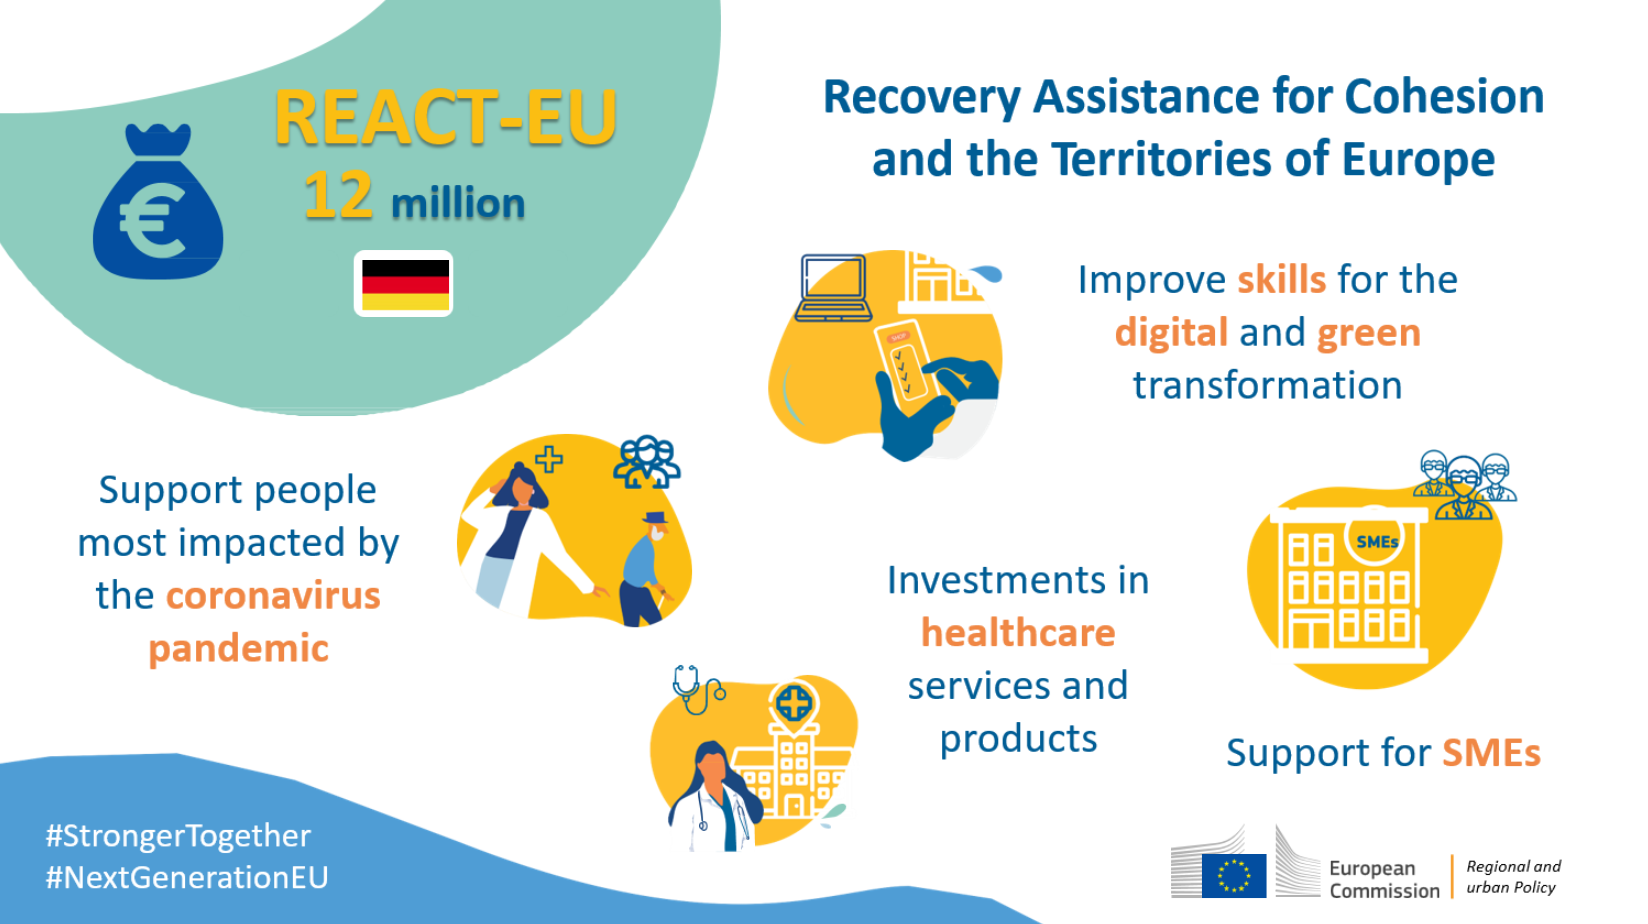  Infographic showing REACT-EU funds impact in Germany. 12 million euros. To support impacted people affected by the COVID-19 pandemic. To support SMEs. To improve skills for the digital and green transition. To invest in healthcare.